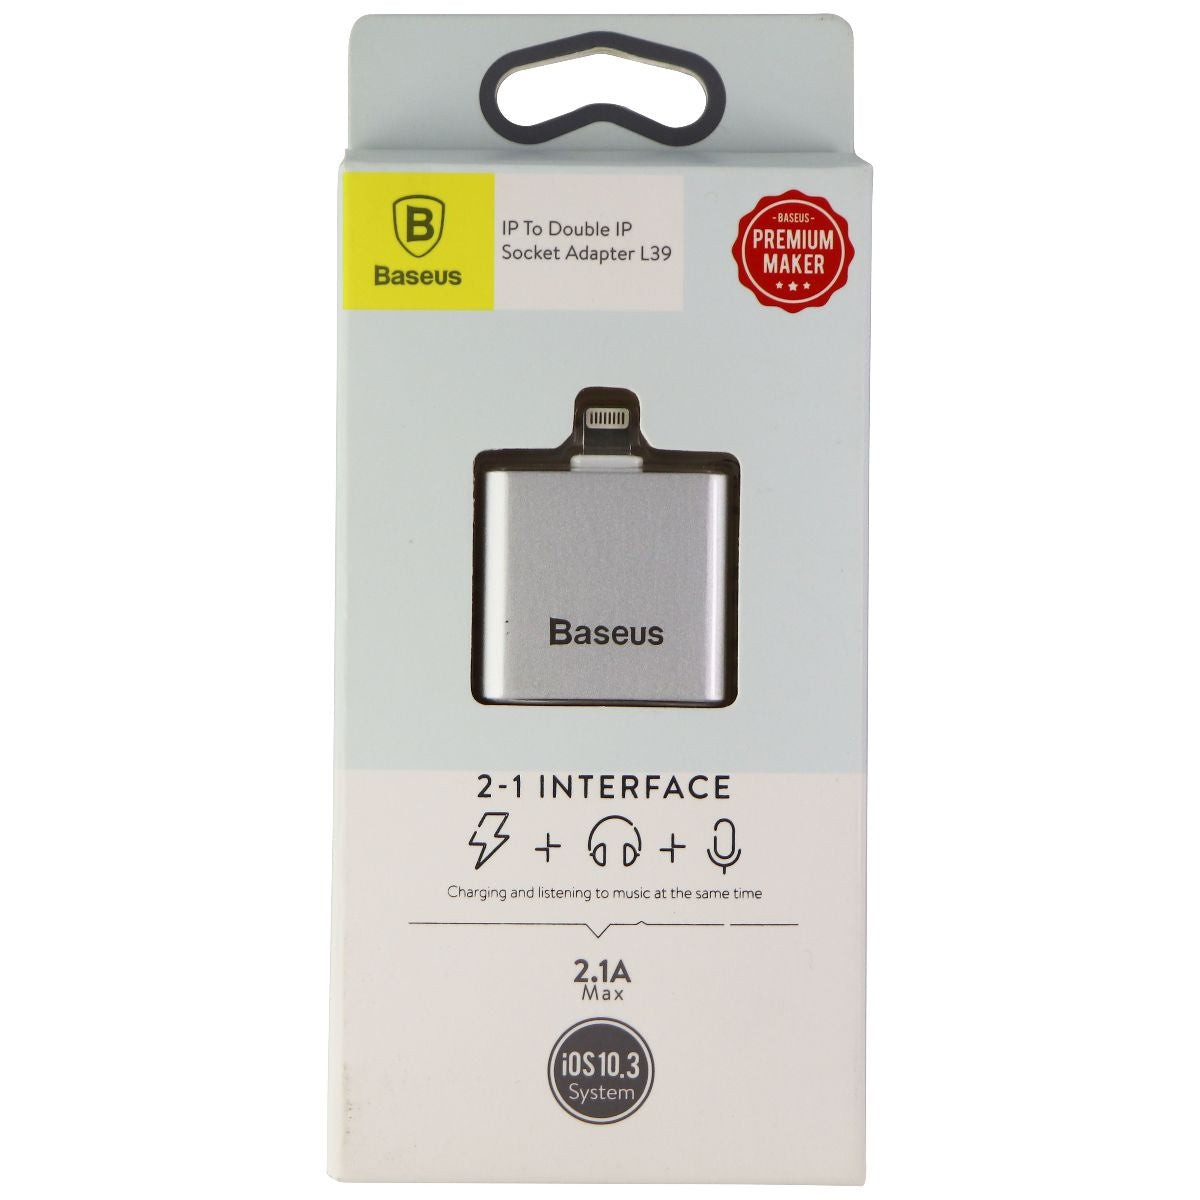 Baseus Lightning 8-Pin to Double 8-Pin Adapter L39 for iPhone/iPad - Silver Cell Phone - Cables & Adapters Baseus    - Simple Cell Bulk Wholesale Pricing - USA Seller